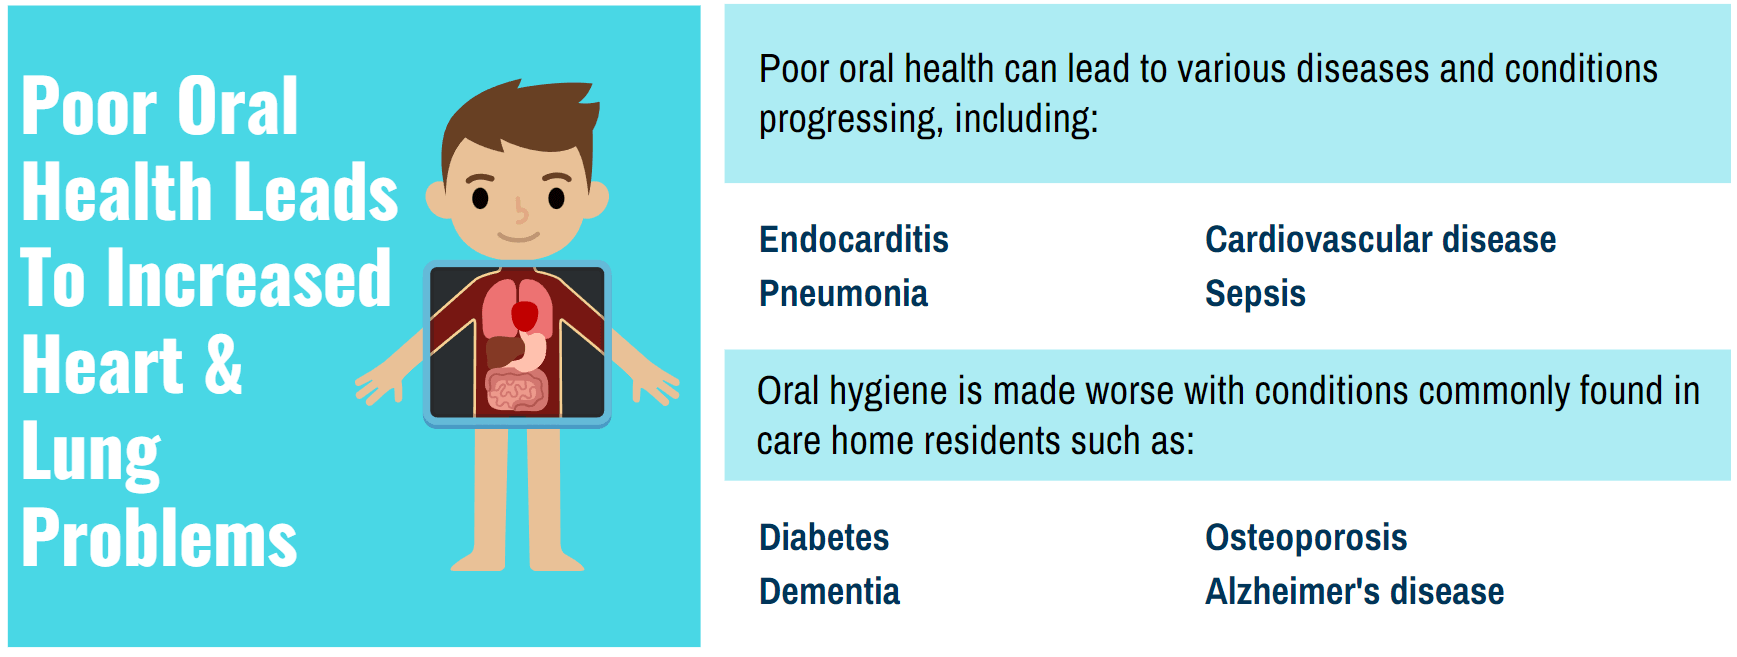 poor oral hygiene in care homes